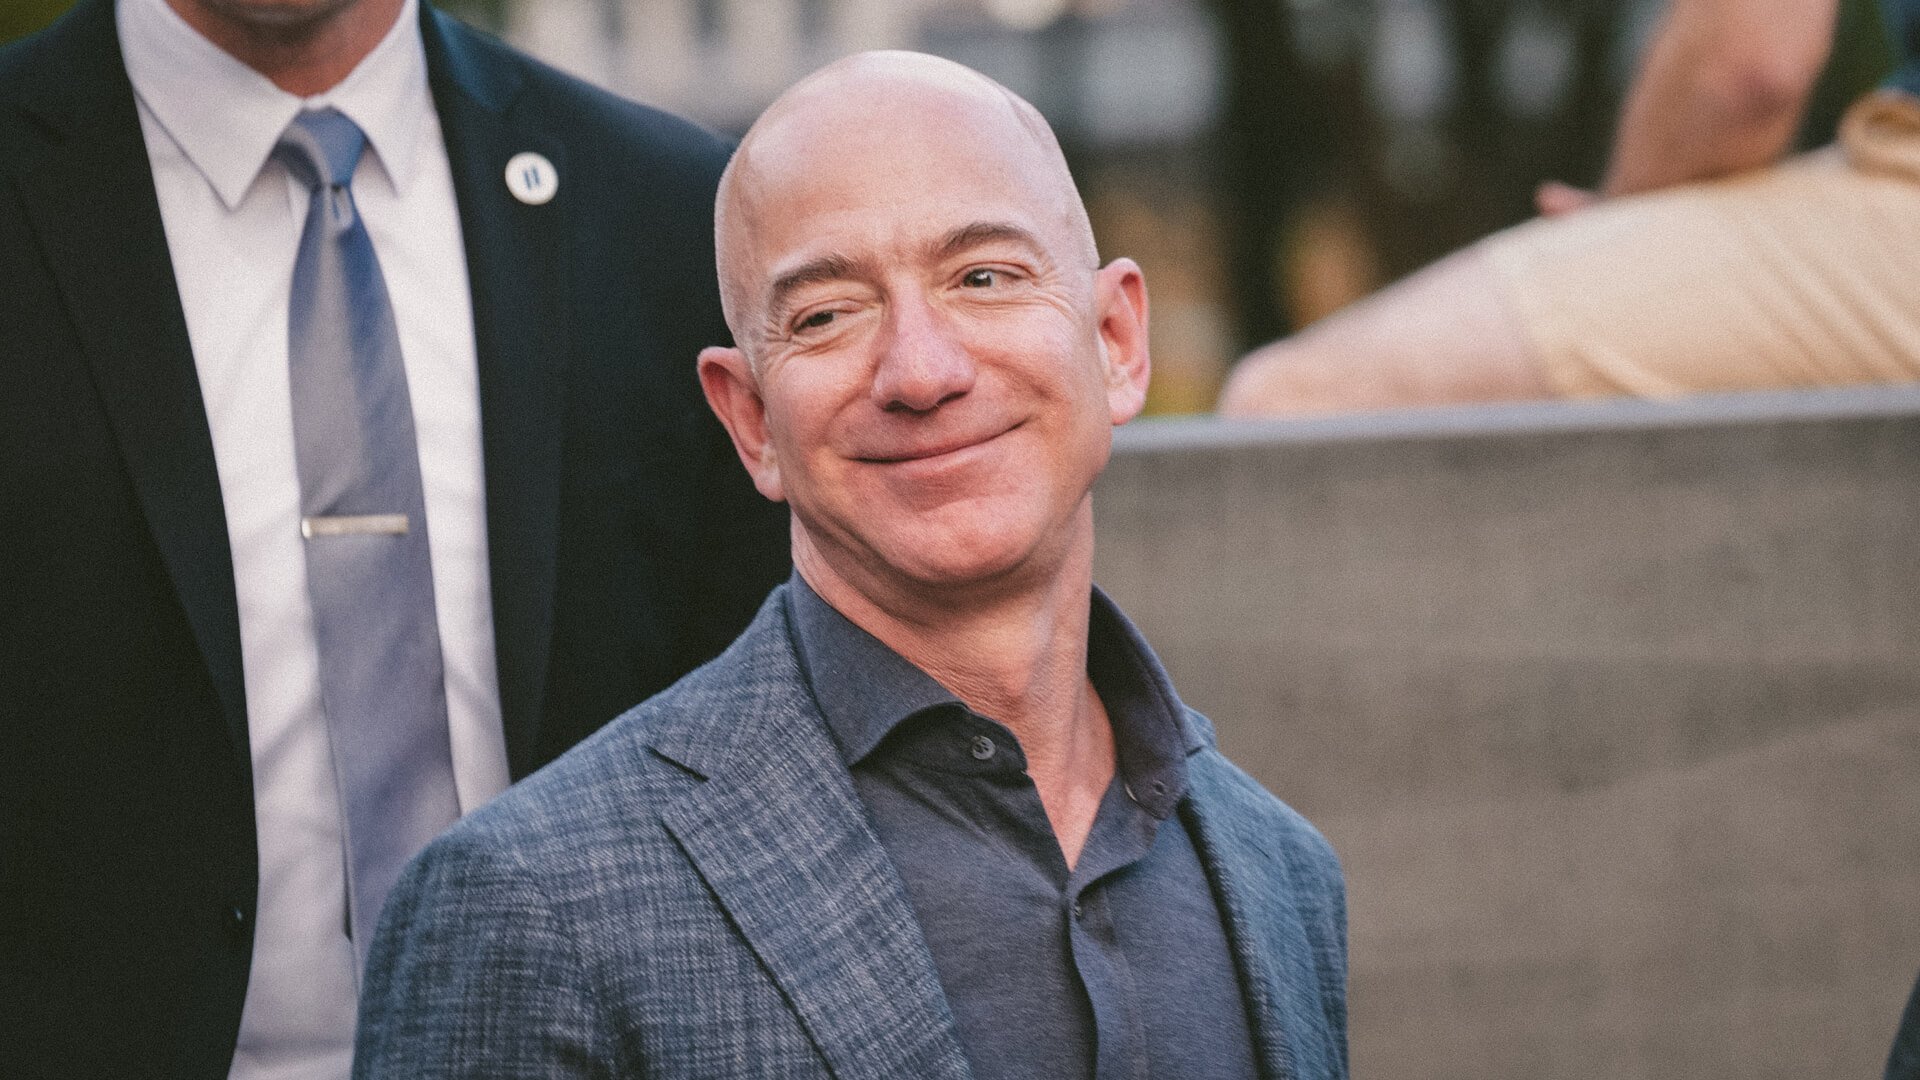 Jeff Bezos and 14 Other Wealthy People & Families Chipping In To Fund Education